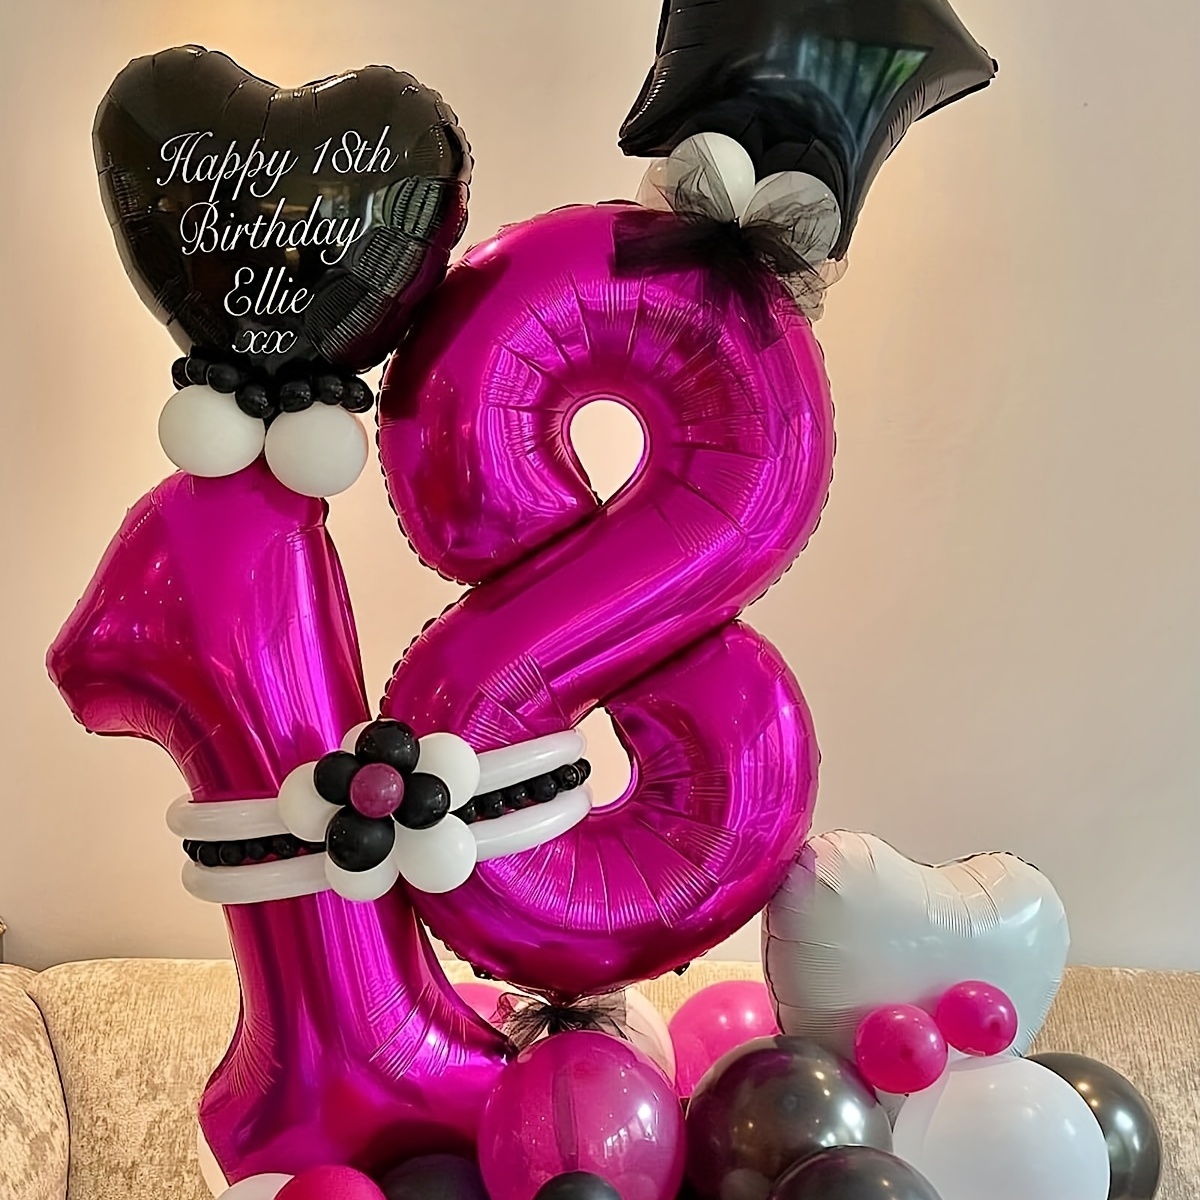 Giant Gold Foil Number Balloon (32 Inches) from Ellie's Party Supply